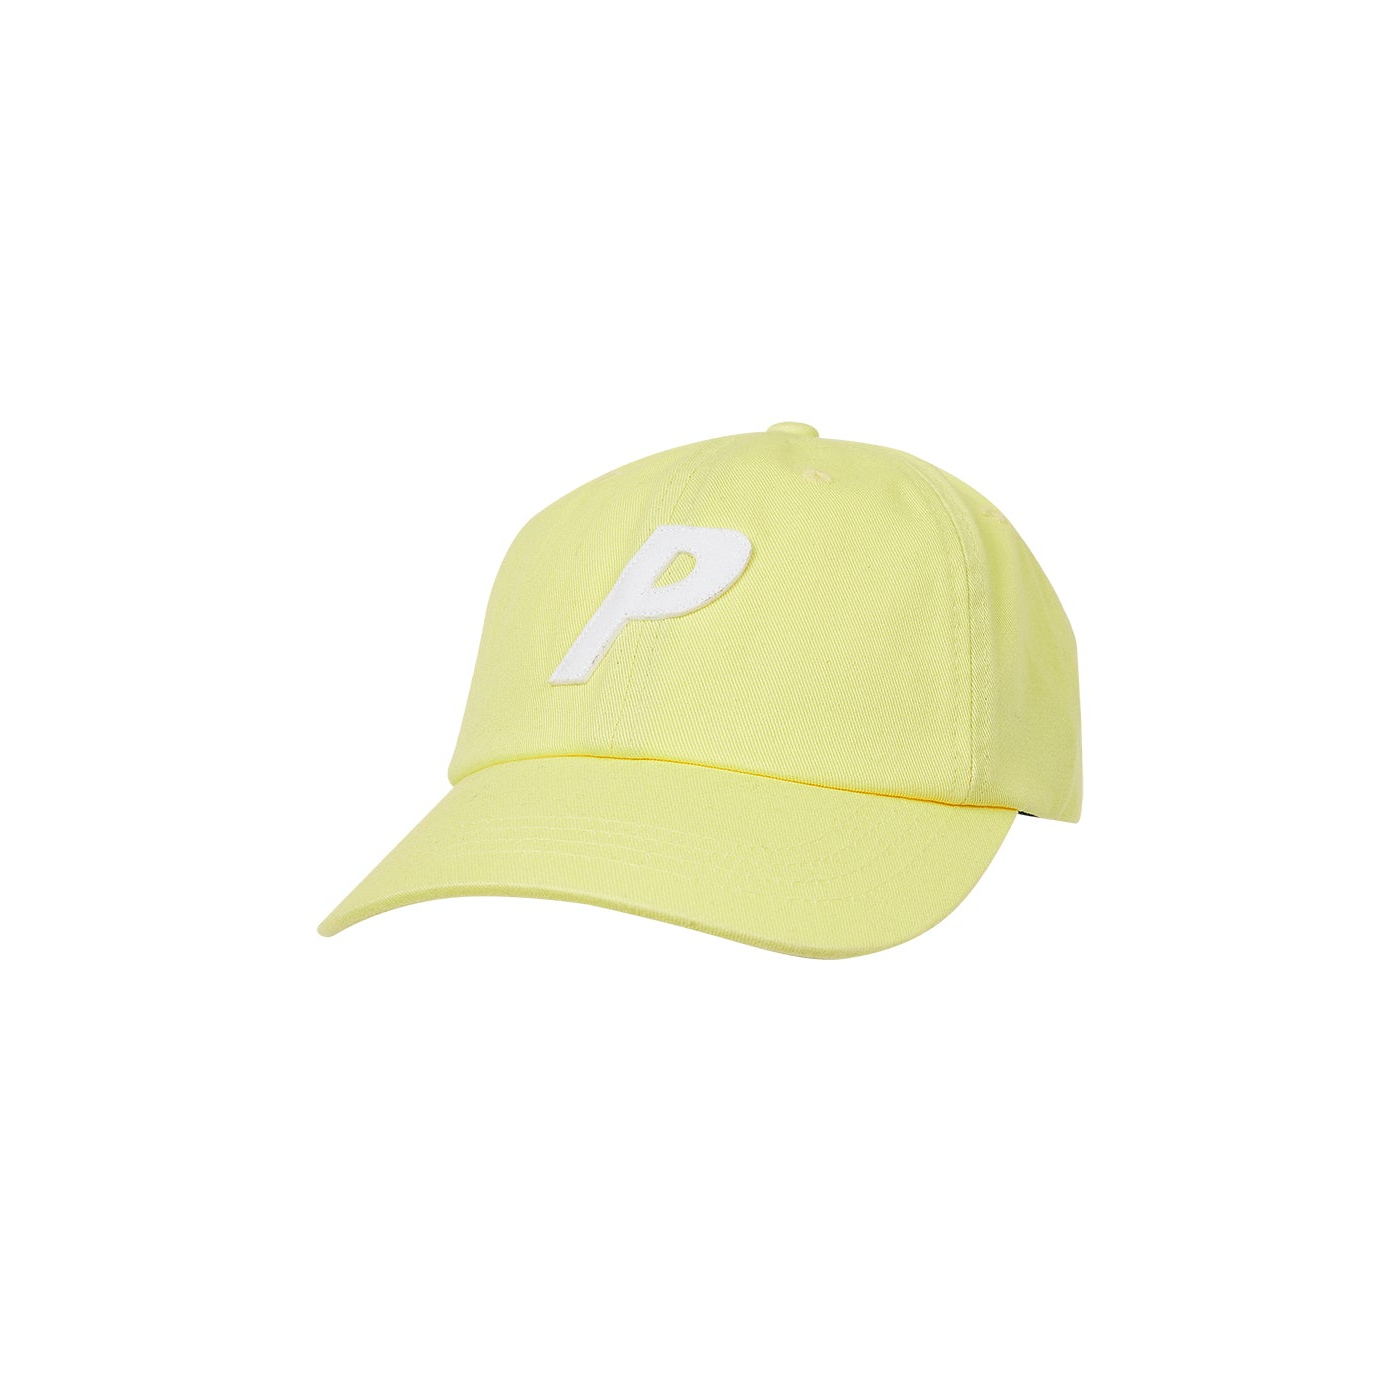 Thumbnail P 6-PANEL MELLOW YELLOW one color